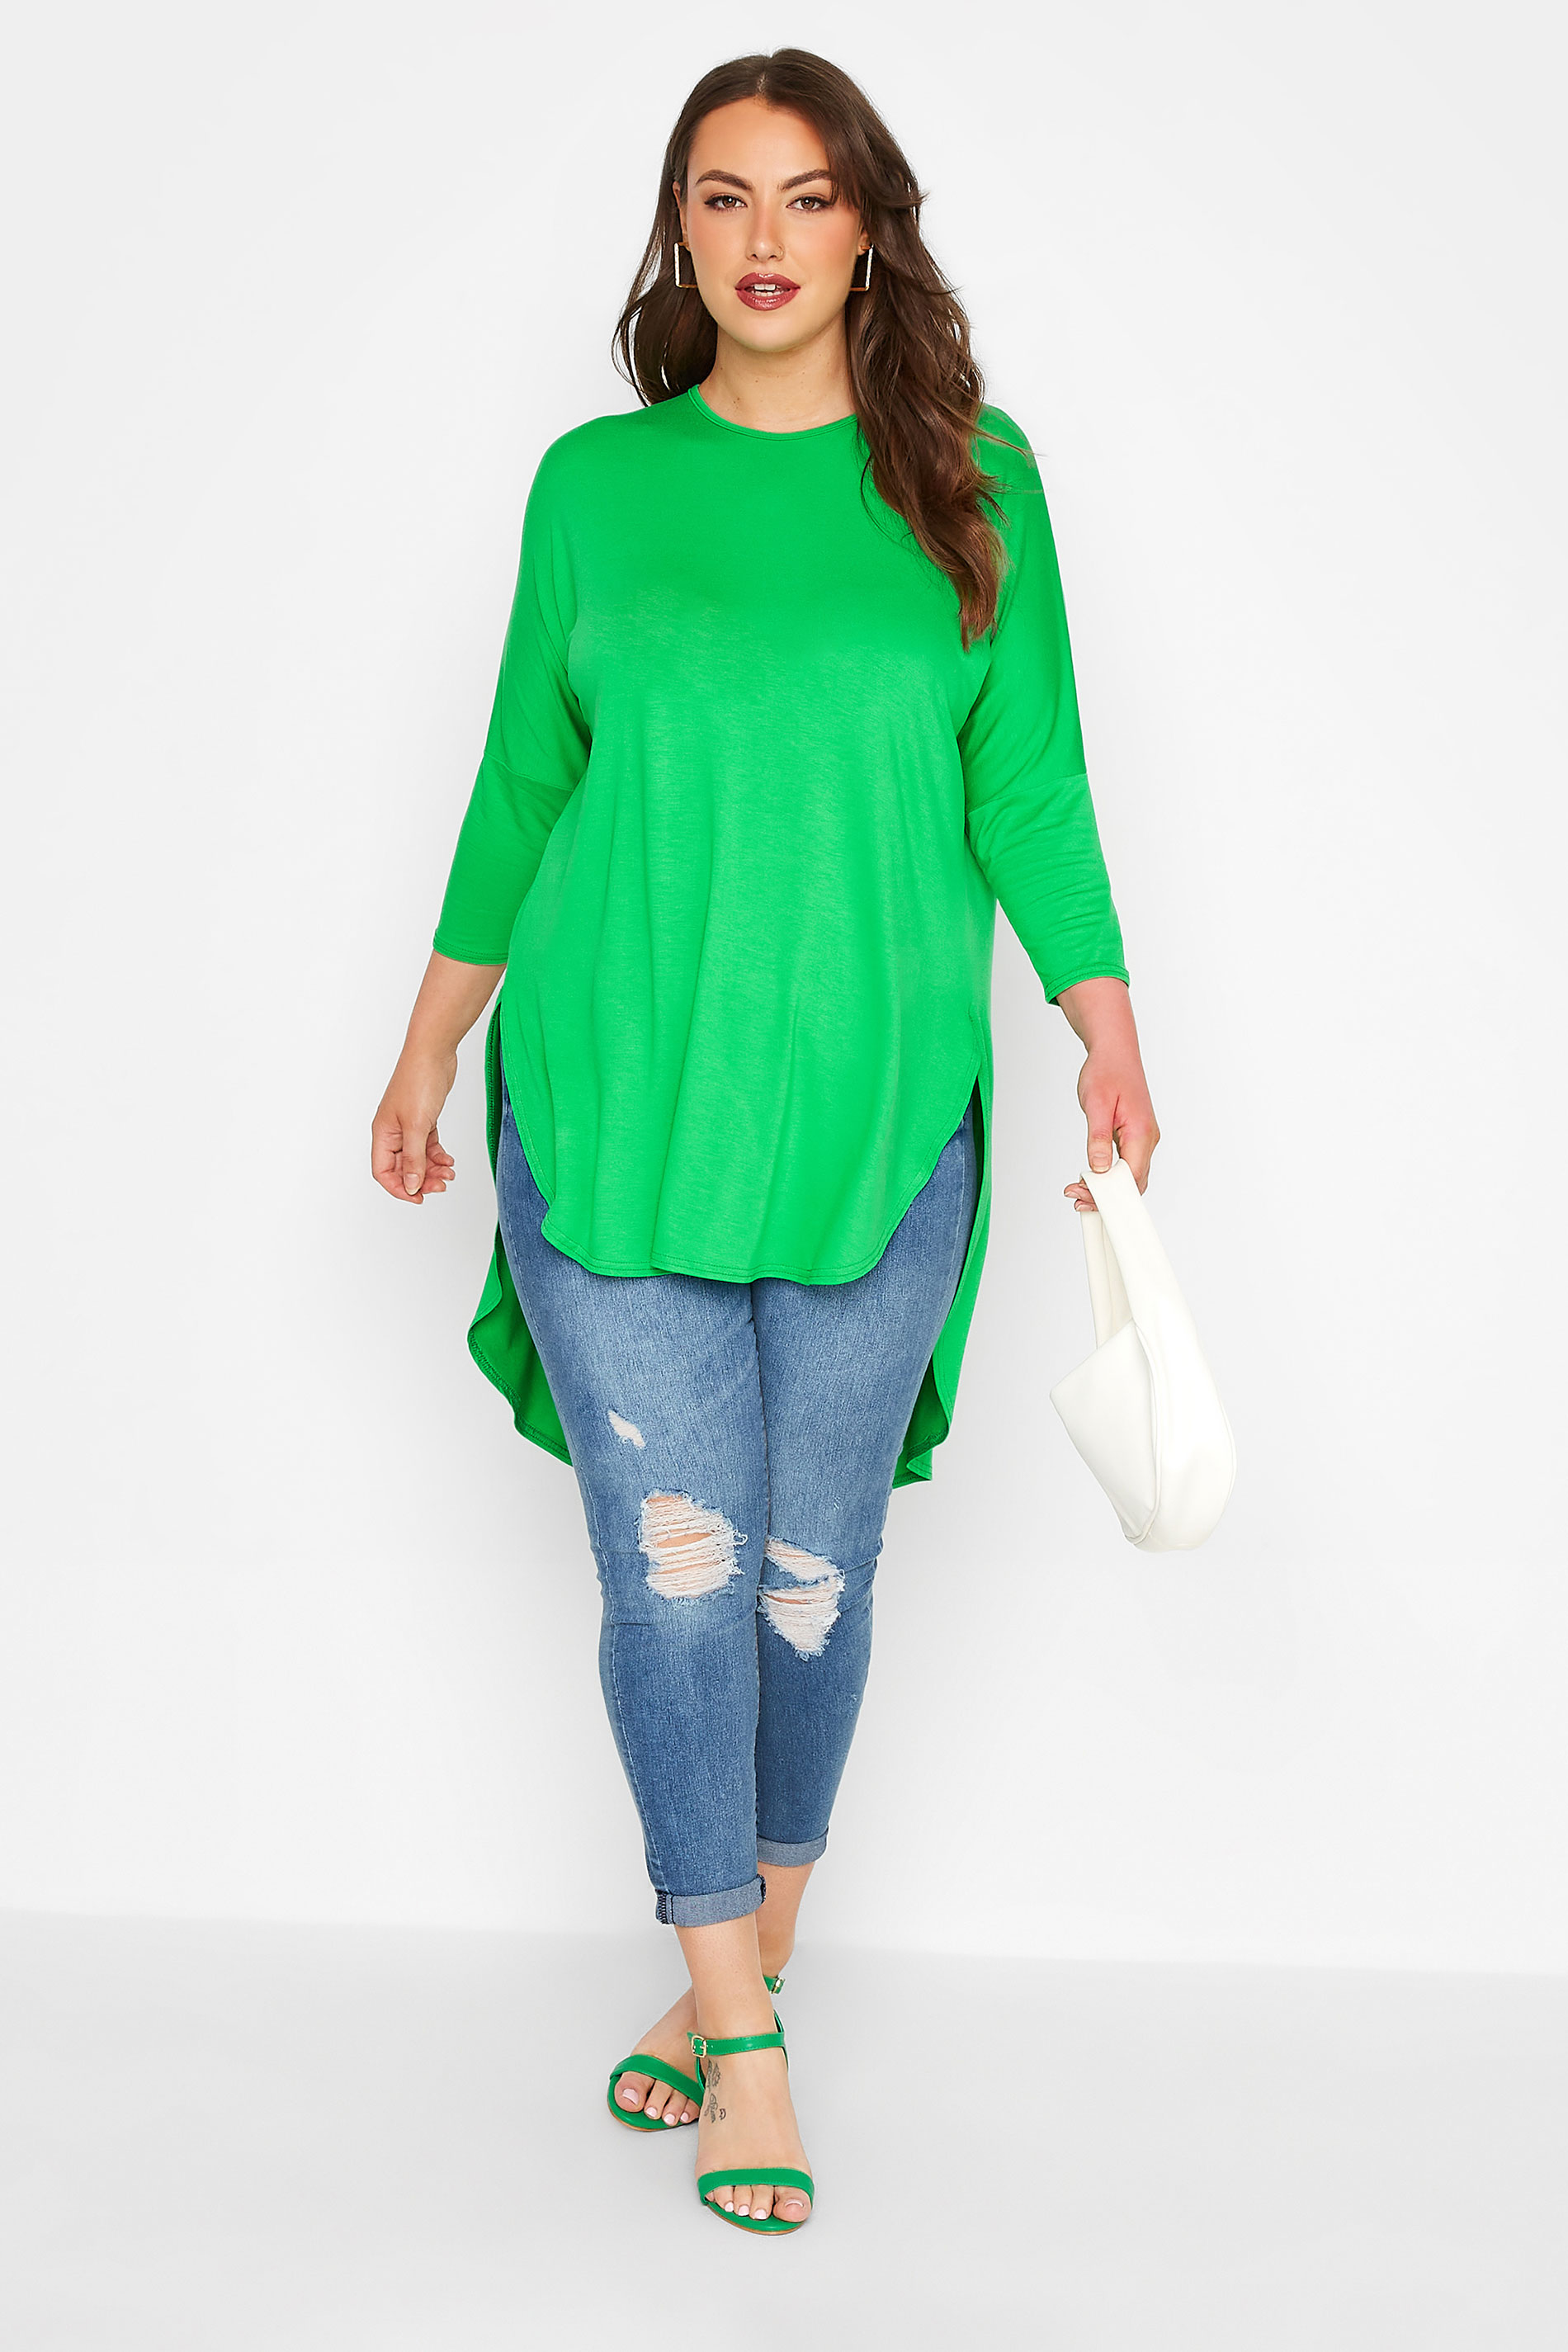 Grande taille  Tops Grande taille  Tops Ourlet Plongeant | LIMITED COLLECTION - T-Shirt Vert Pomme Manches Longues Ourlet Plongeant - MQ89414